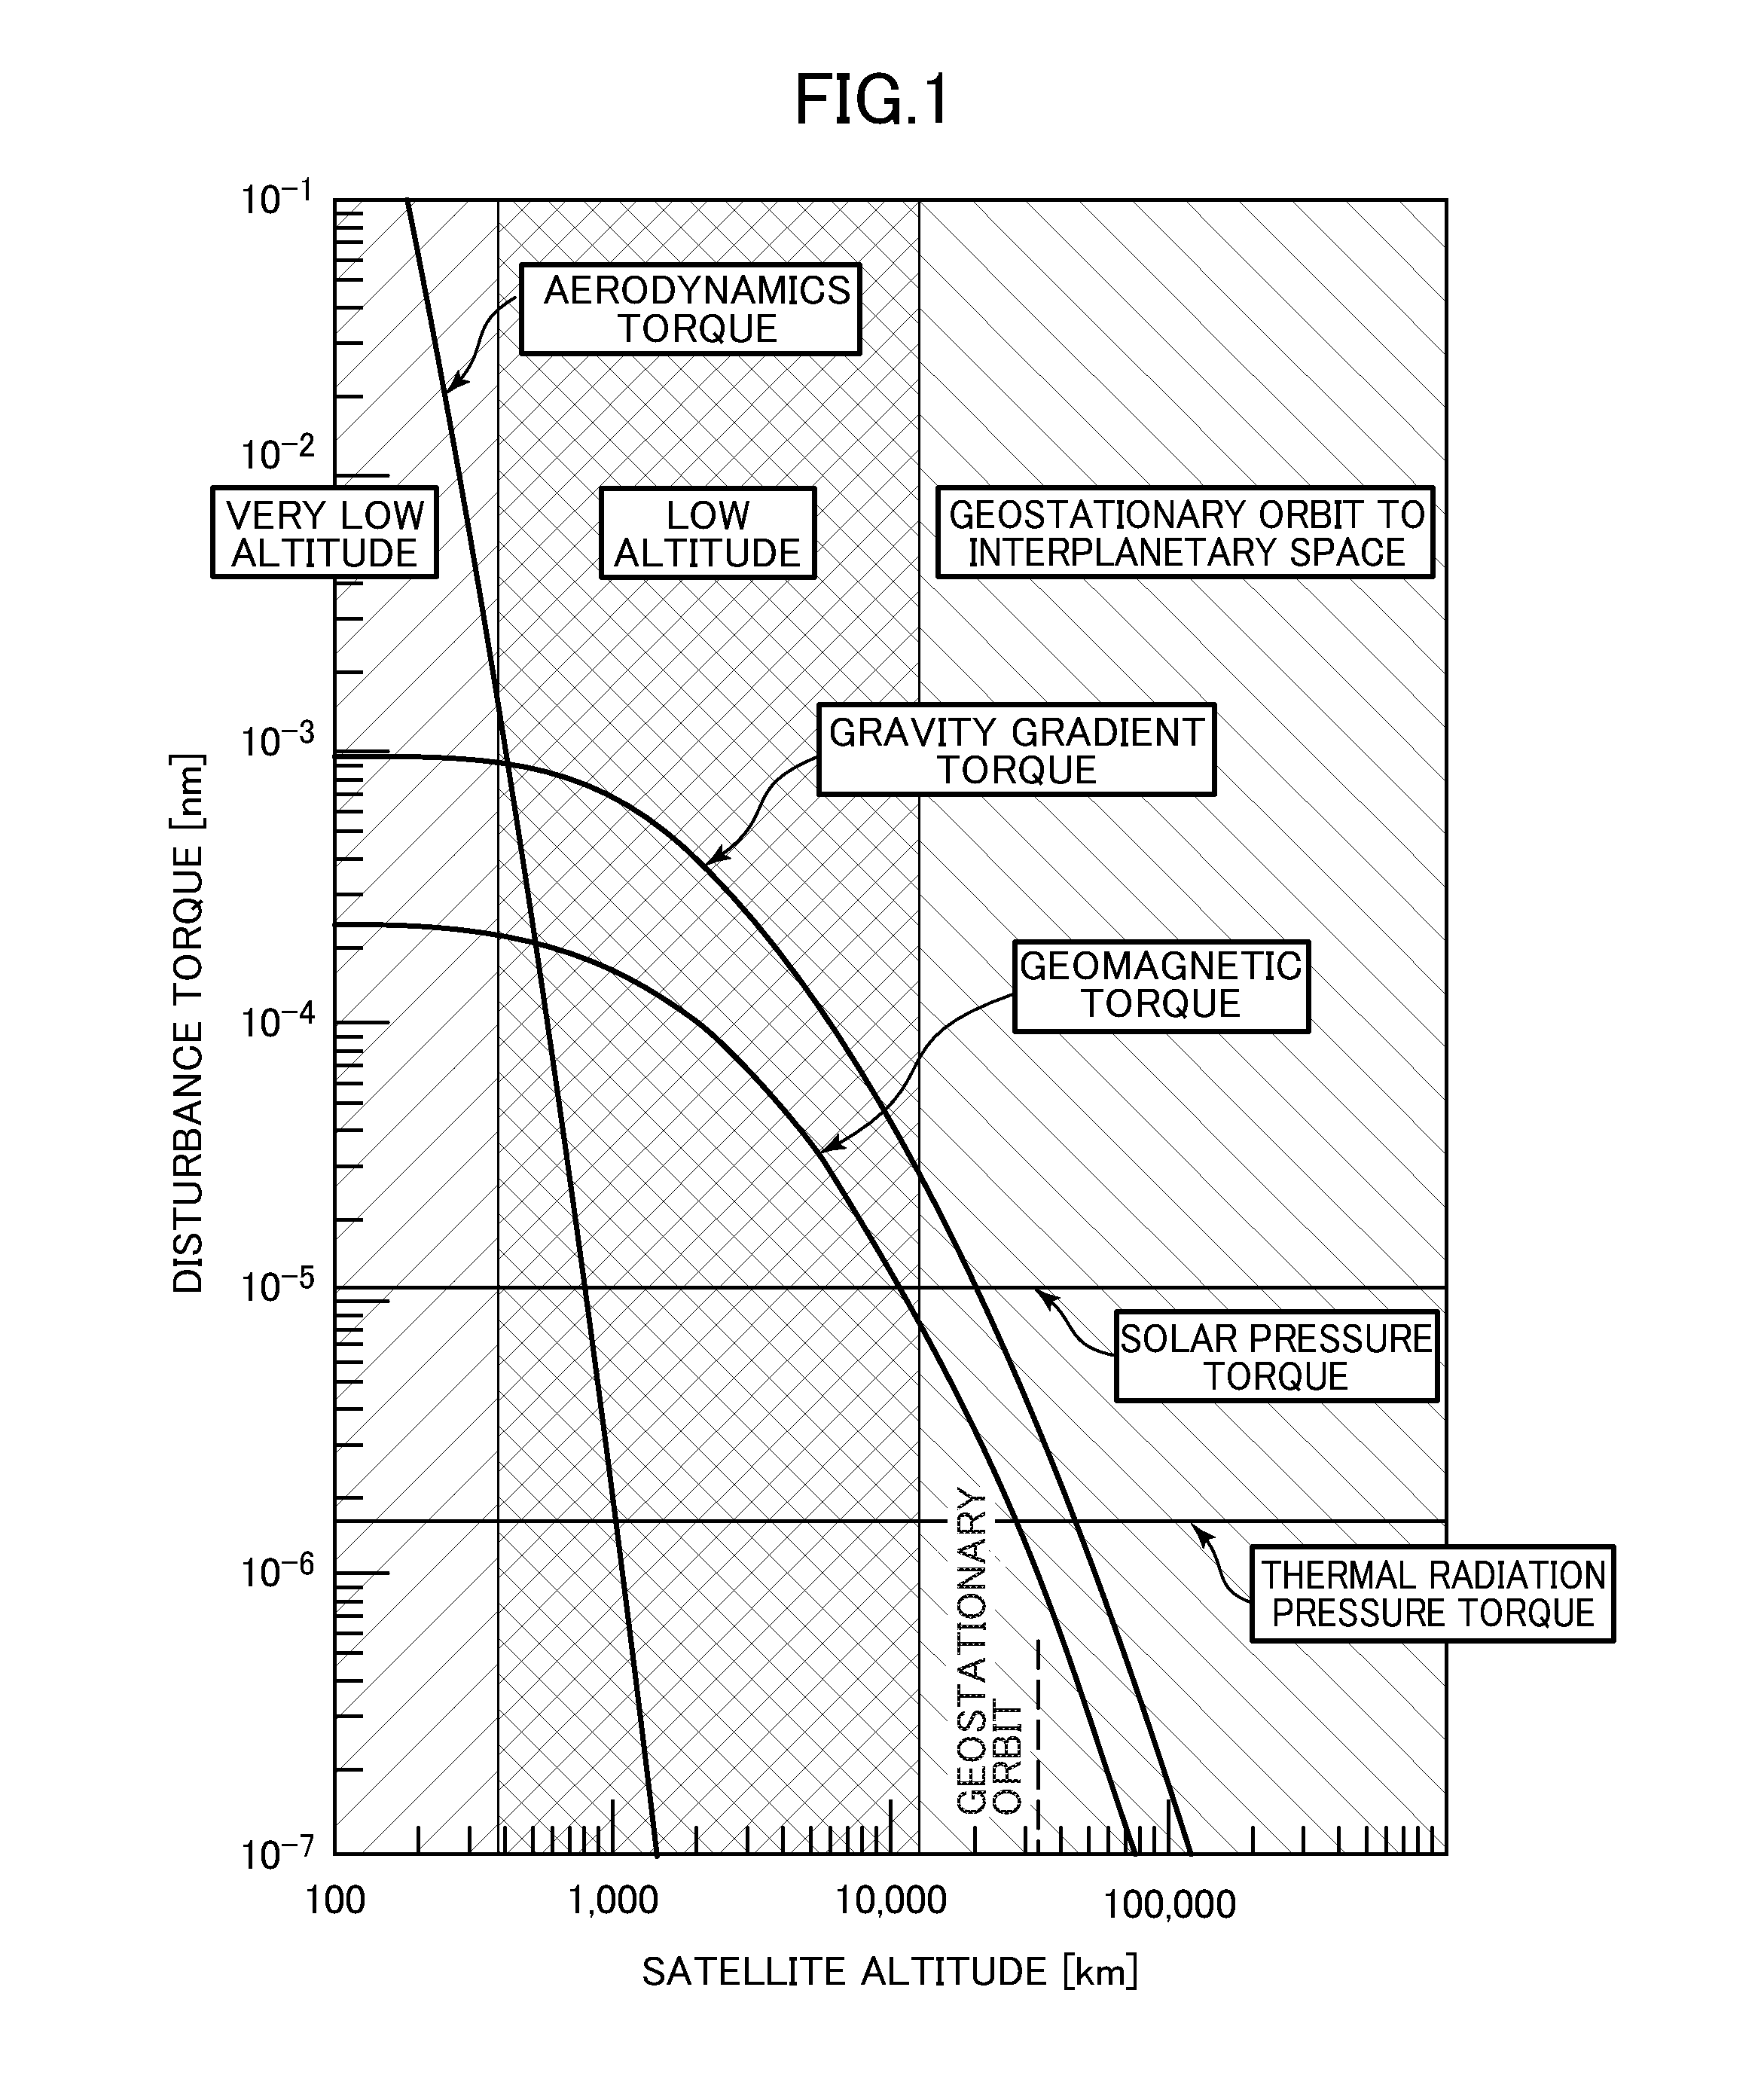 Torque generation system, attitude control system for spacecraft, and relative position and velocity control system for spacecraft